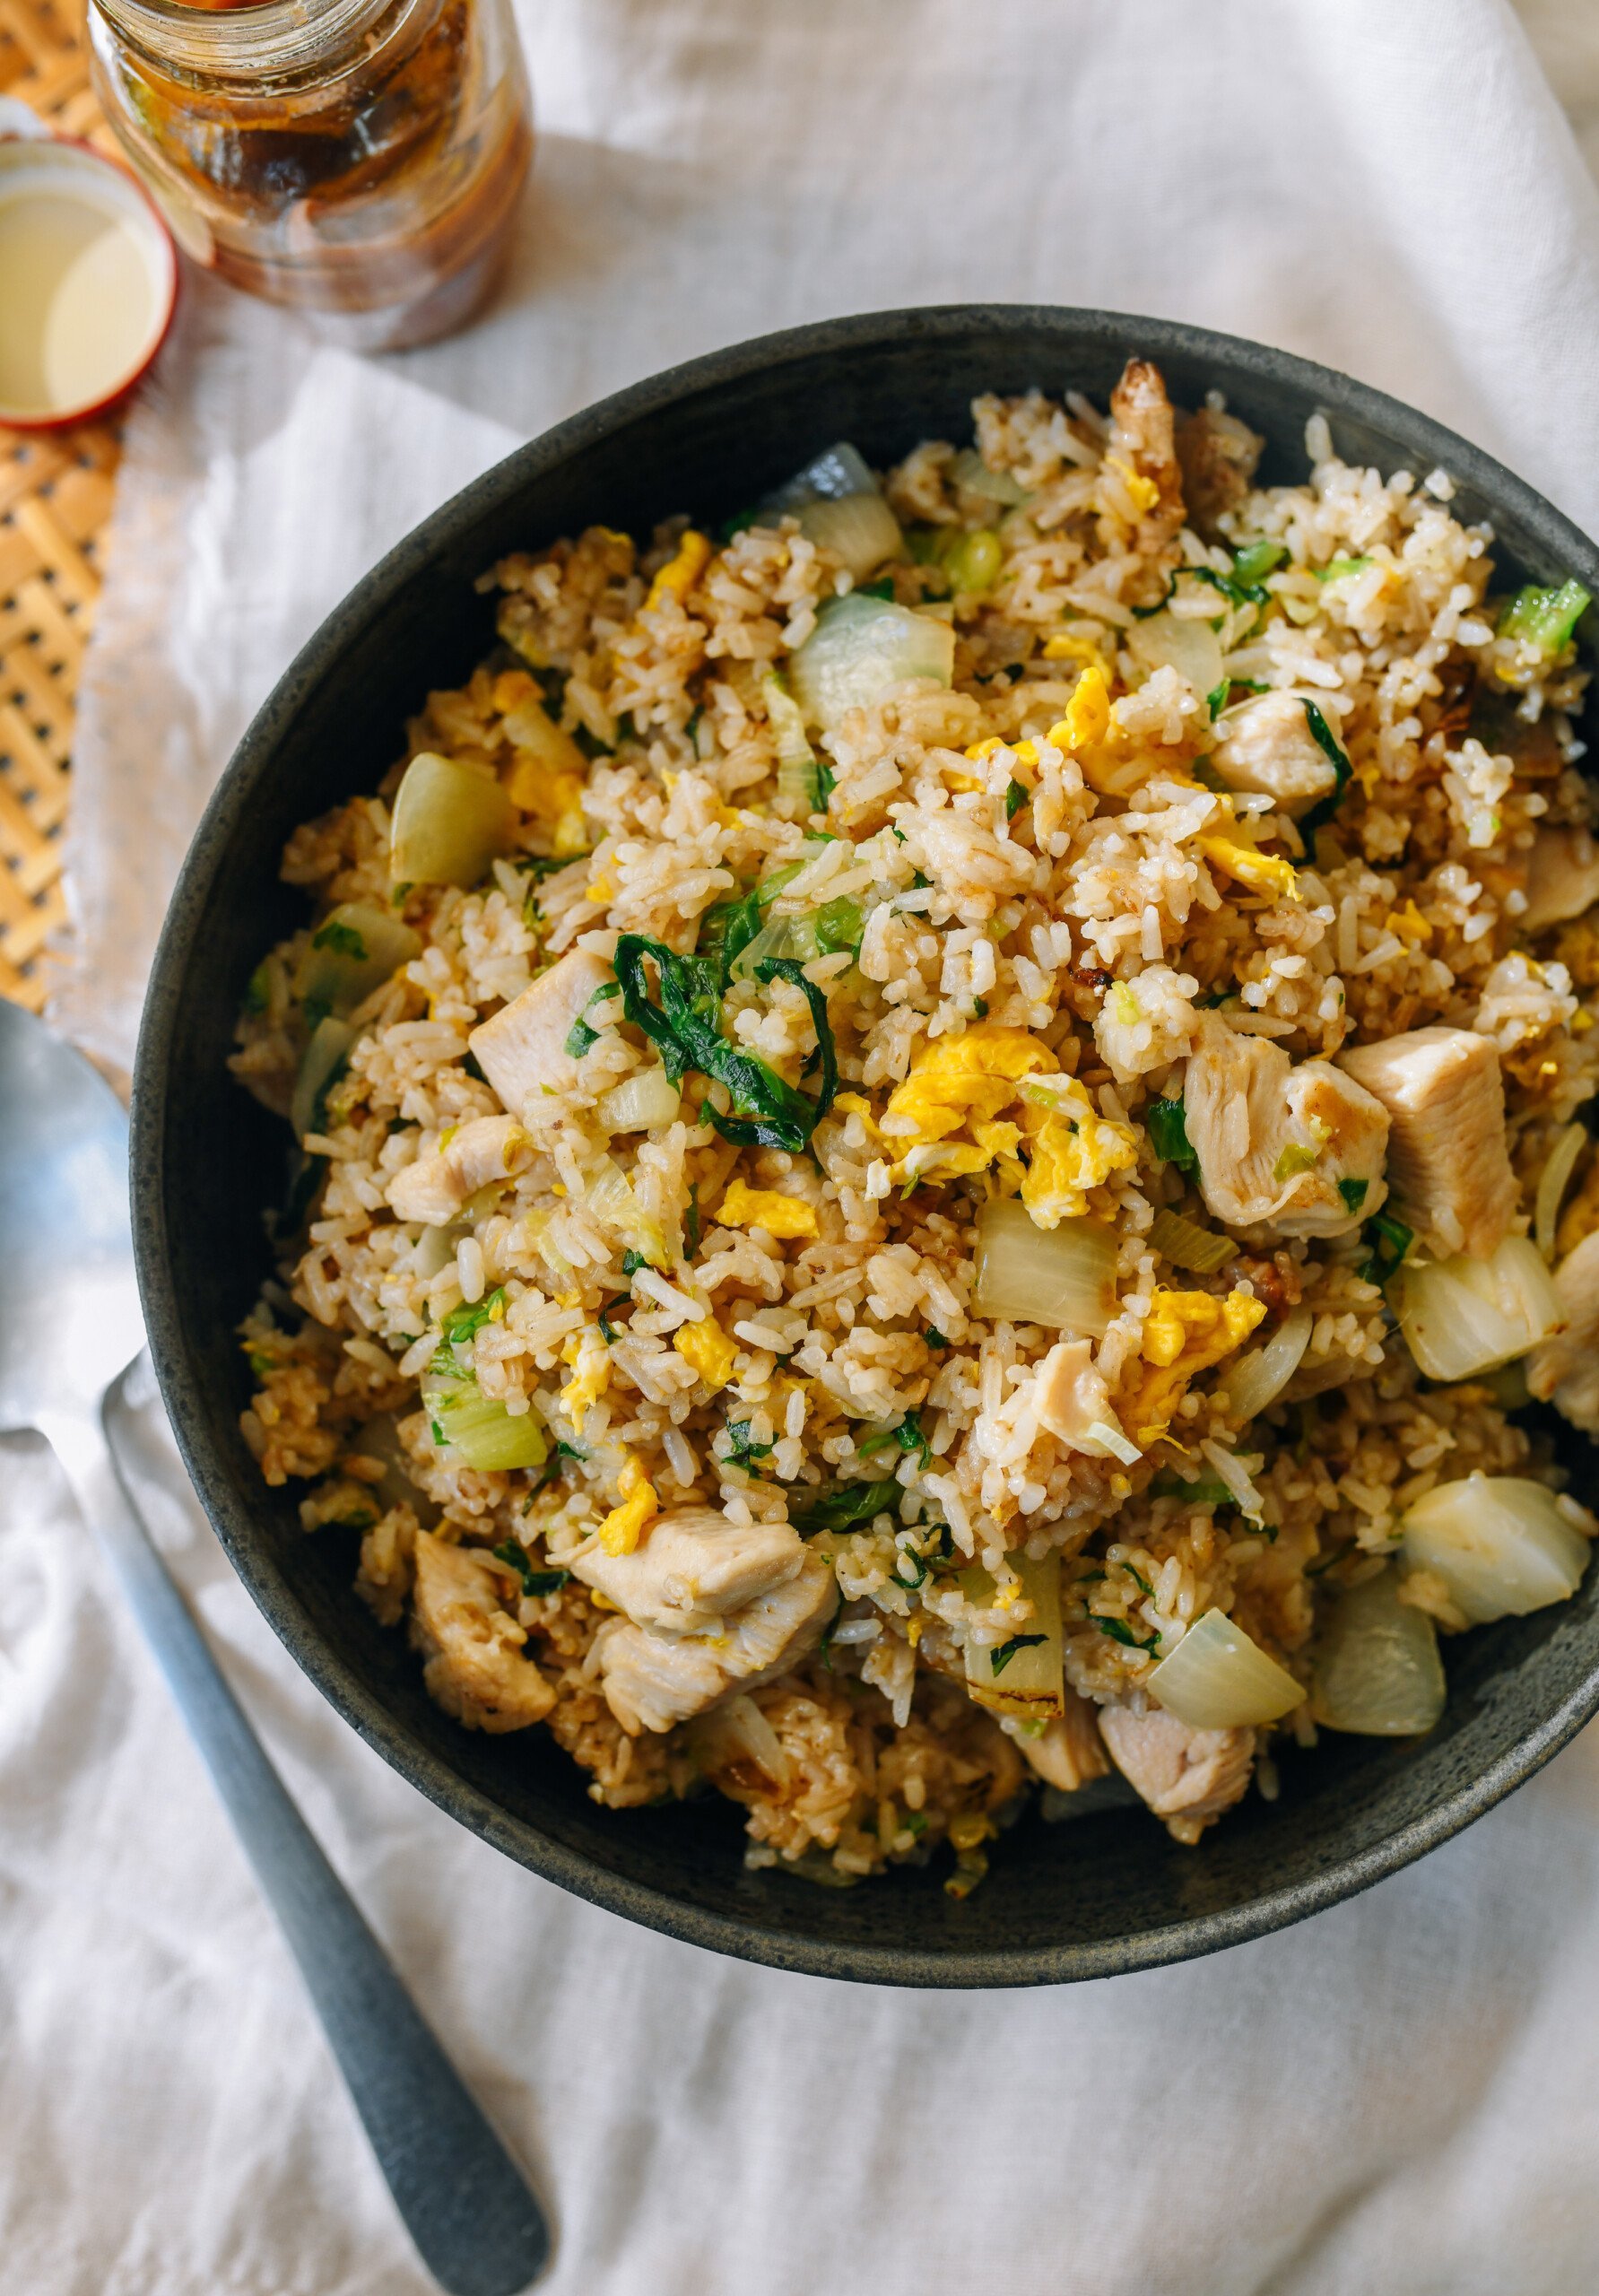 Bowl of Anchovy Fried Rice like Cantonese Salted Fish Fried Rice